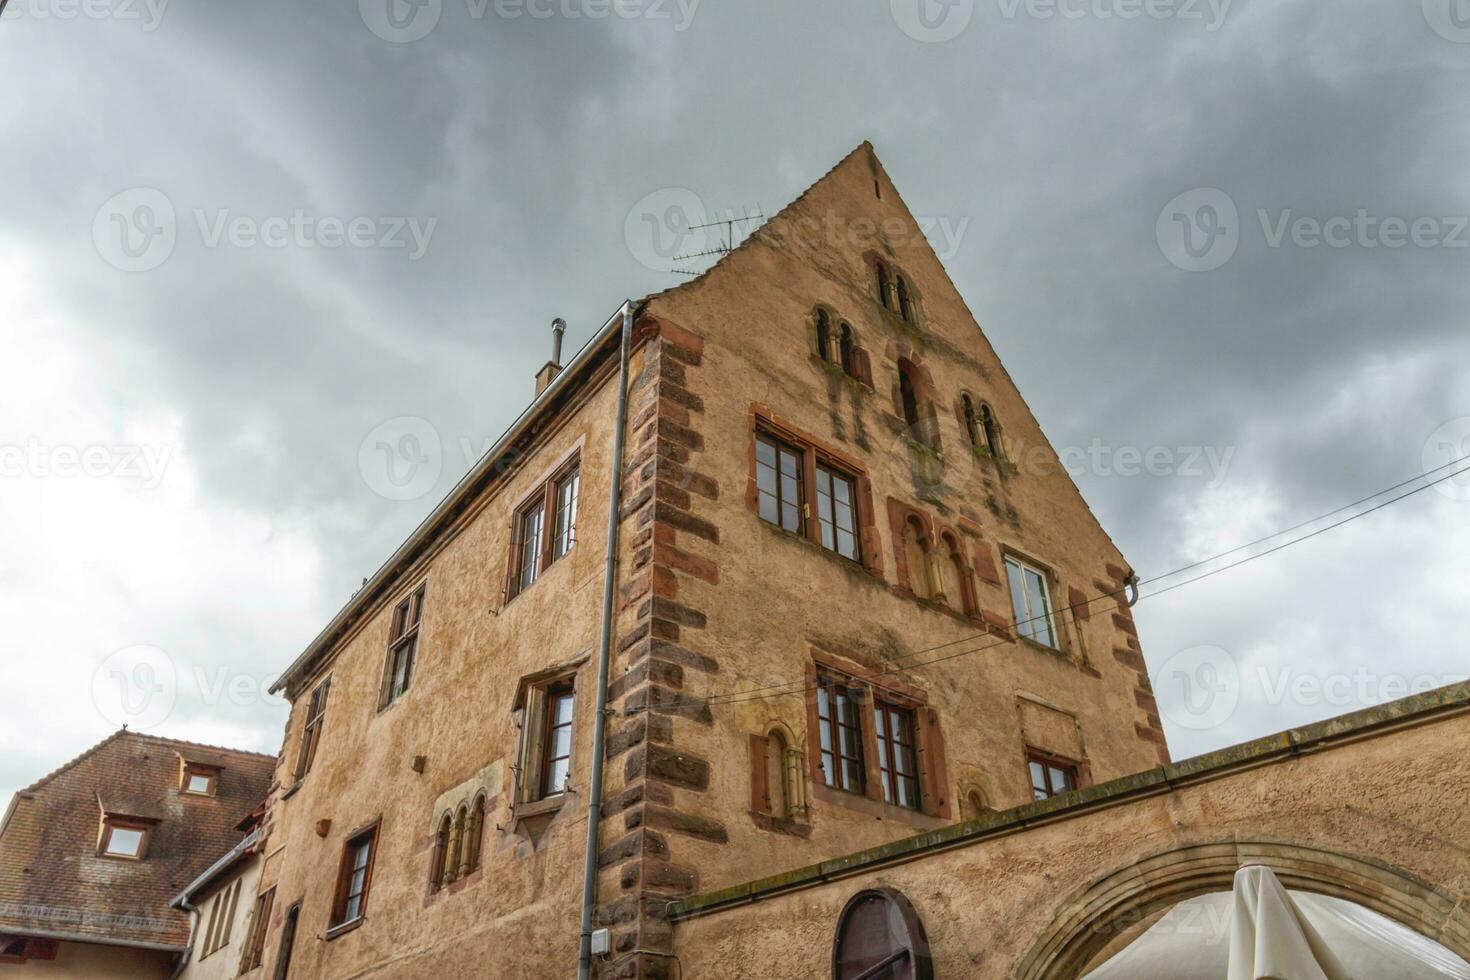 Romanesque house of the Rathsamhausens at street, Obernai, Alsace, France photo